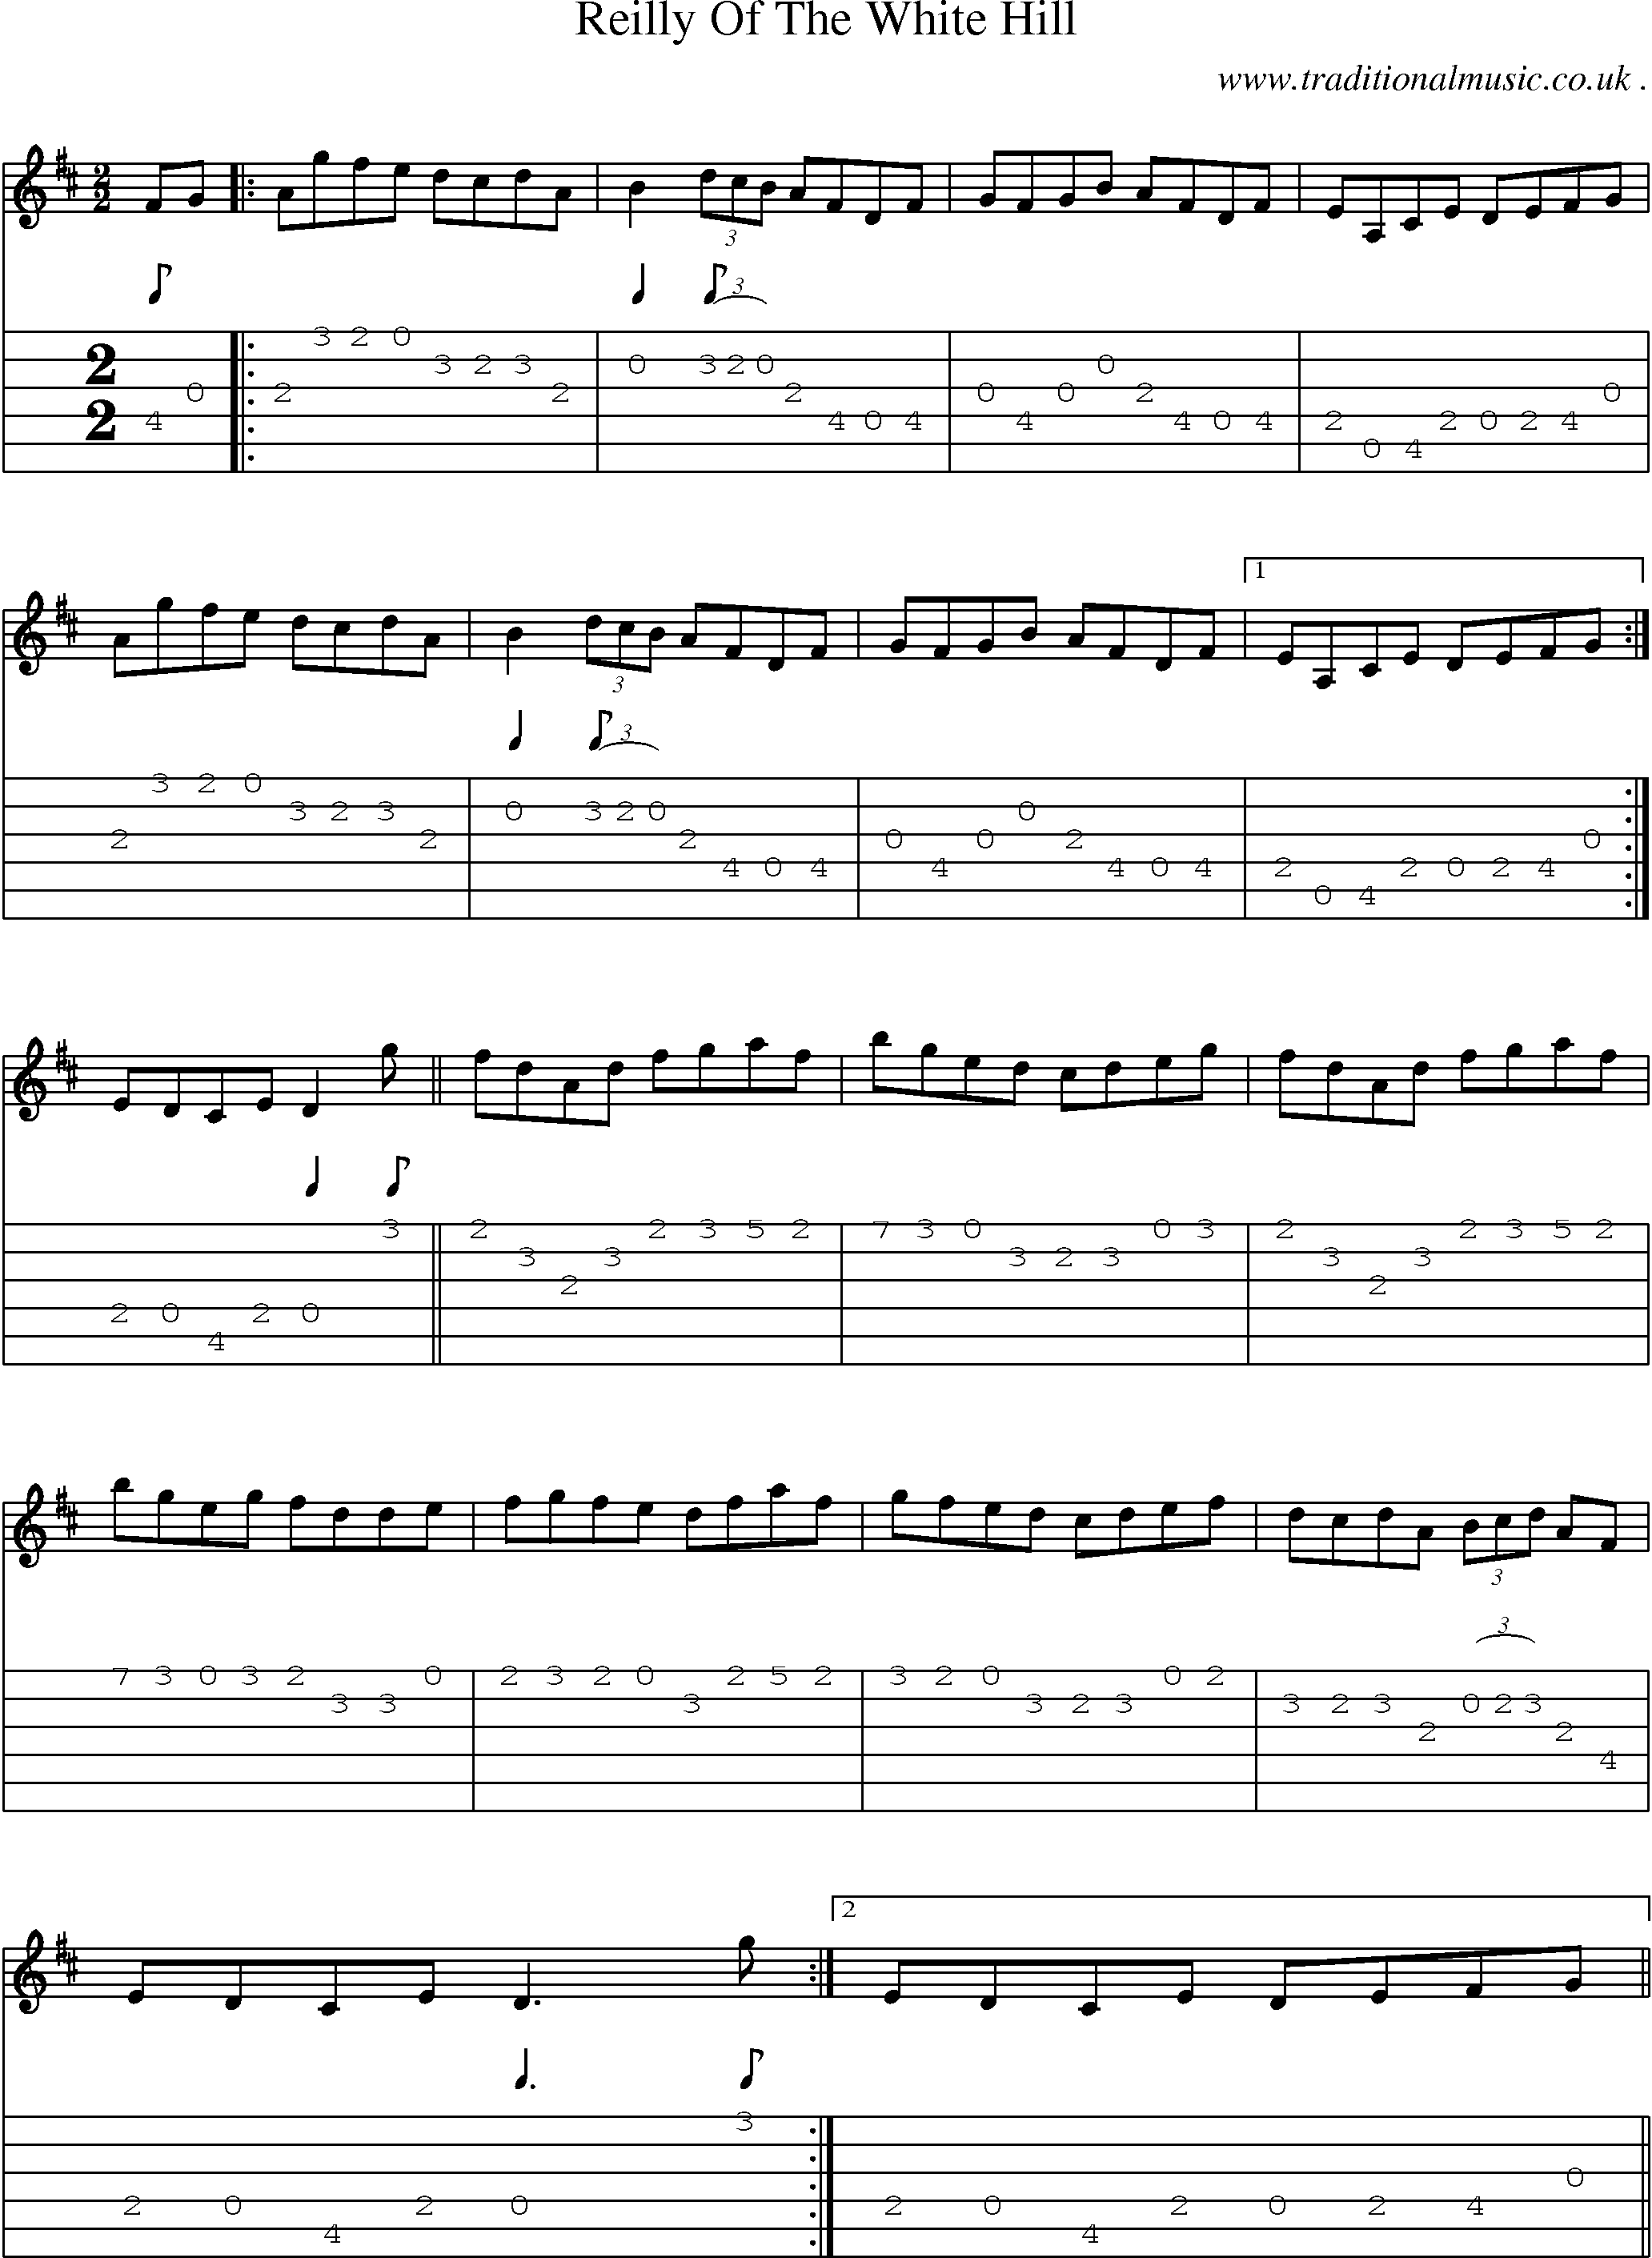 Sheet-Music and Guitar Tabs for Reilly Of The White Hill